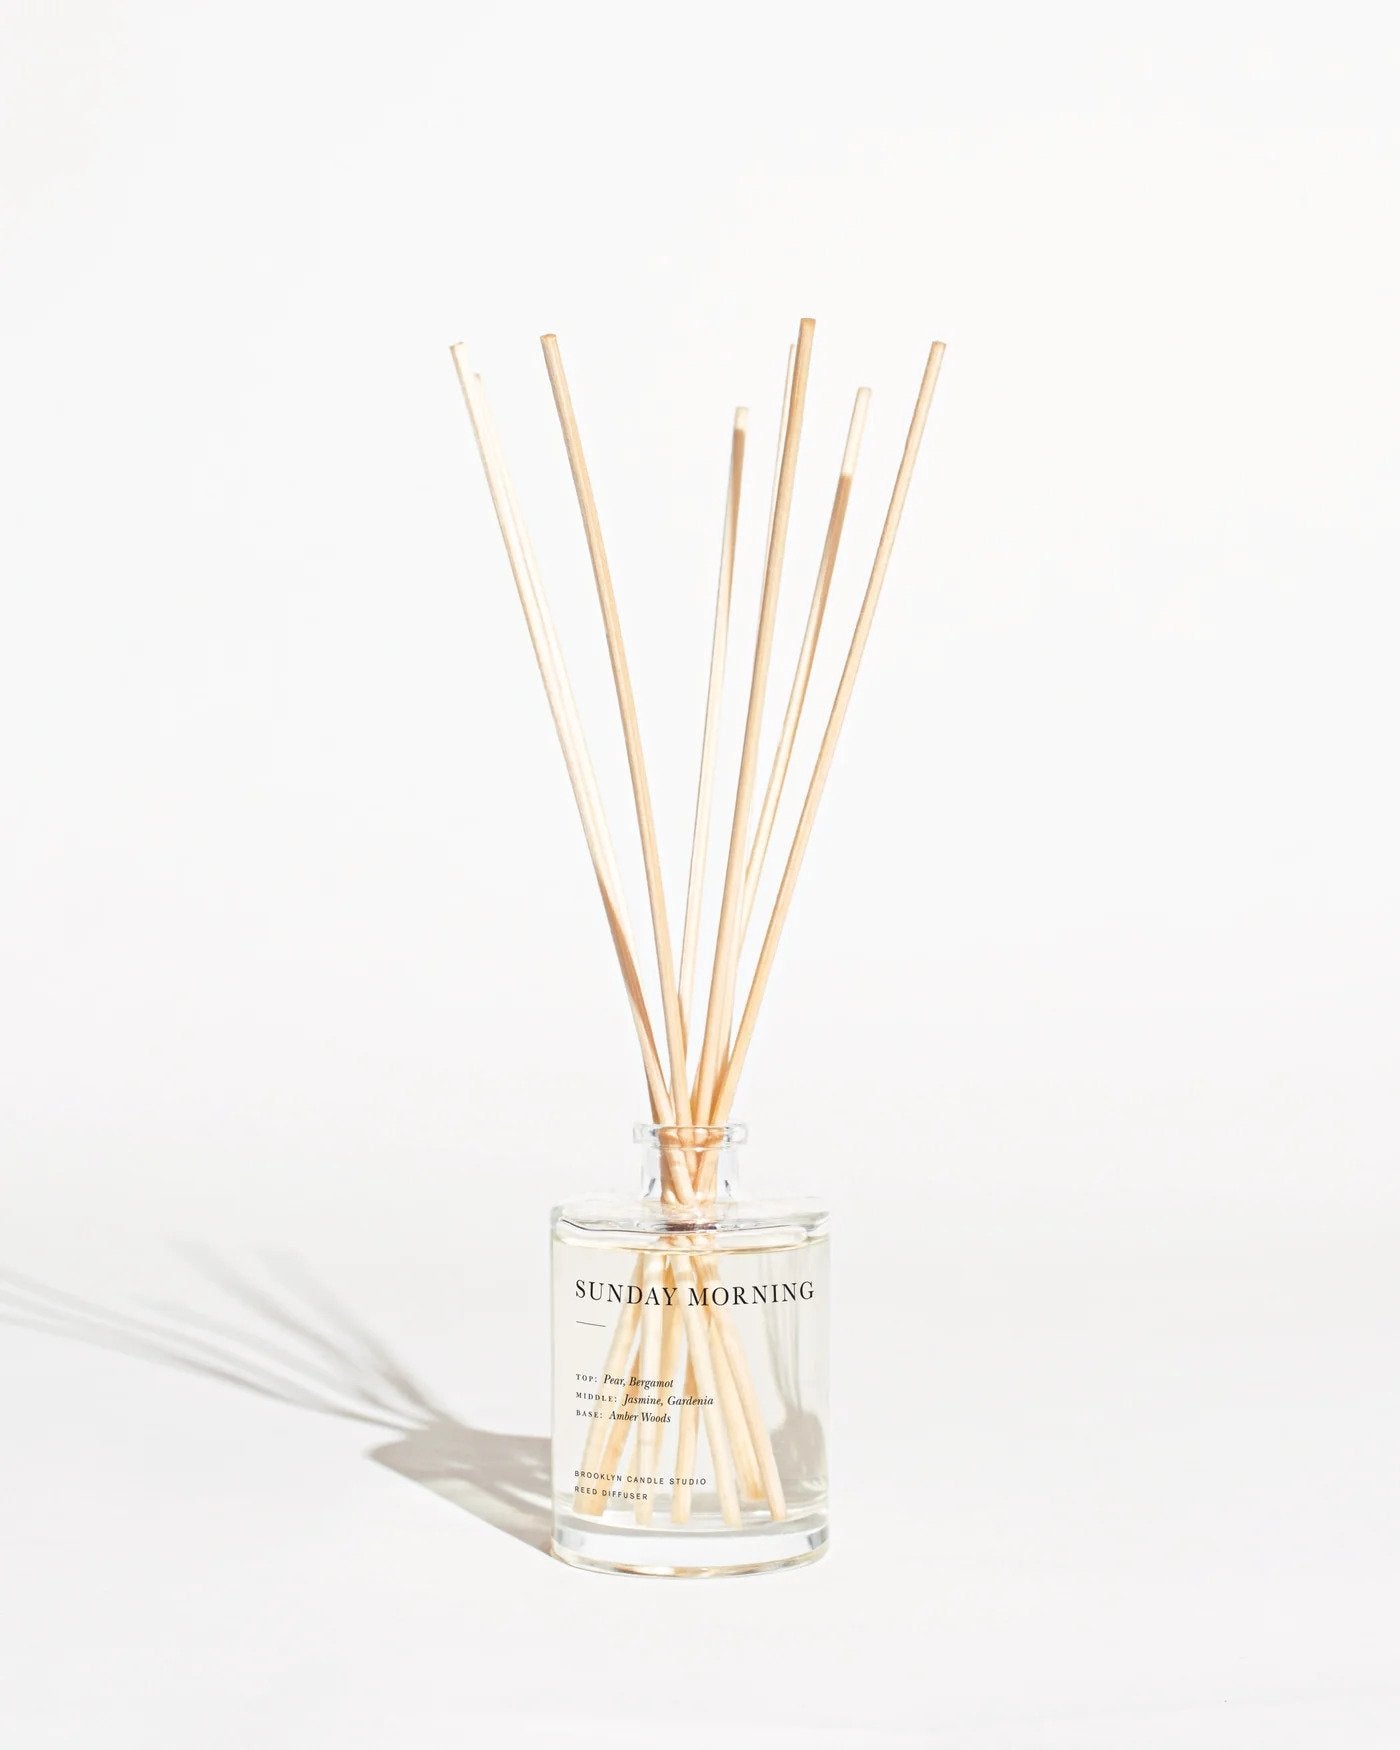 Sunday Morning Reed Diffuser by Brooklyn Candle Studio